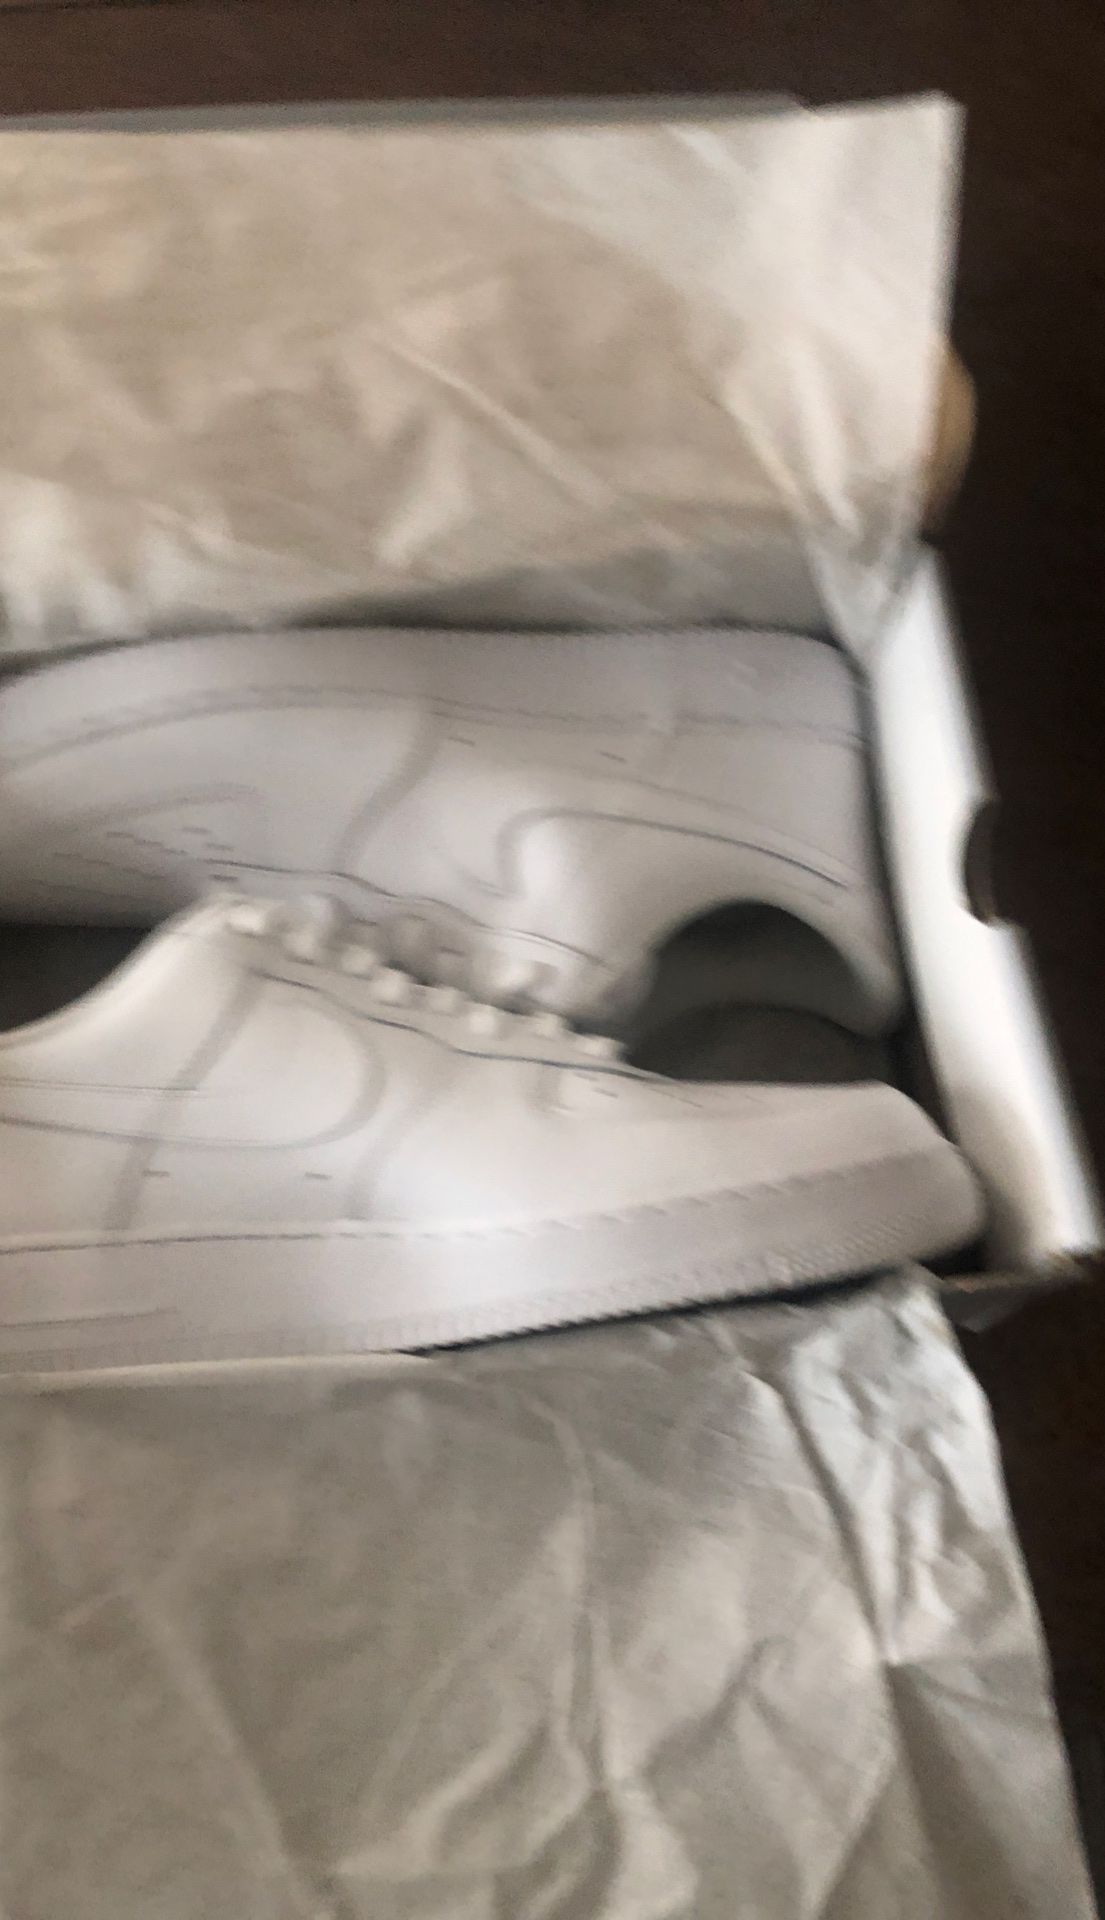 Green & White Nike Air Force 1's - 10.5 for Sale in Denver, CO - OfferUp